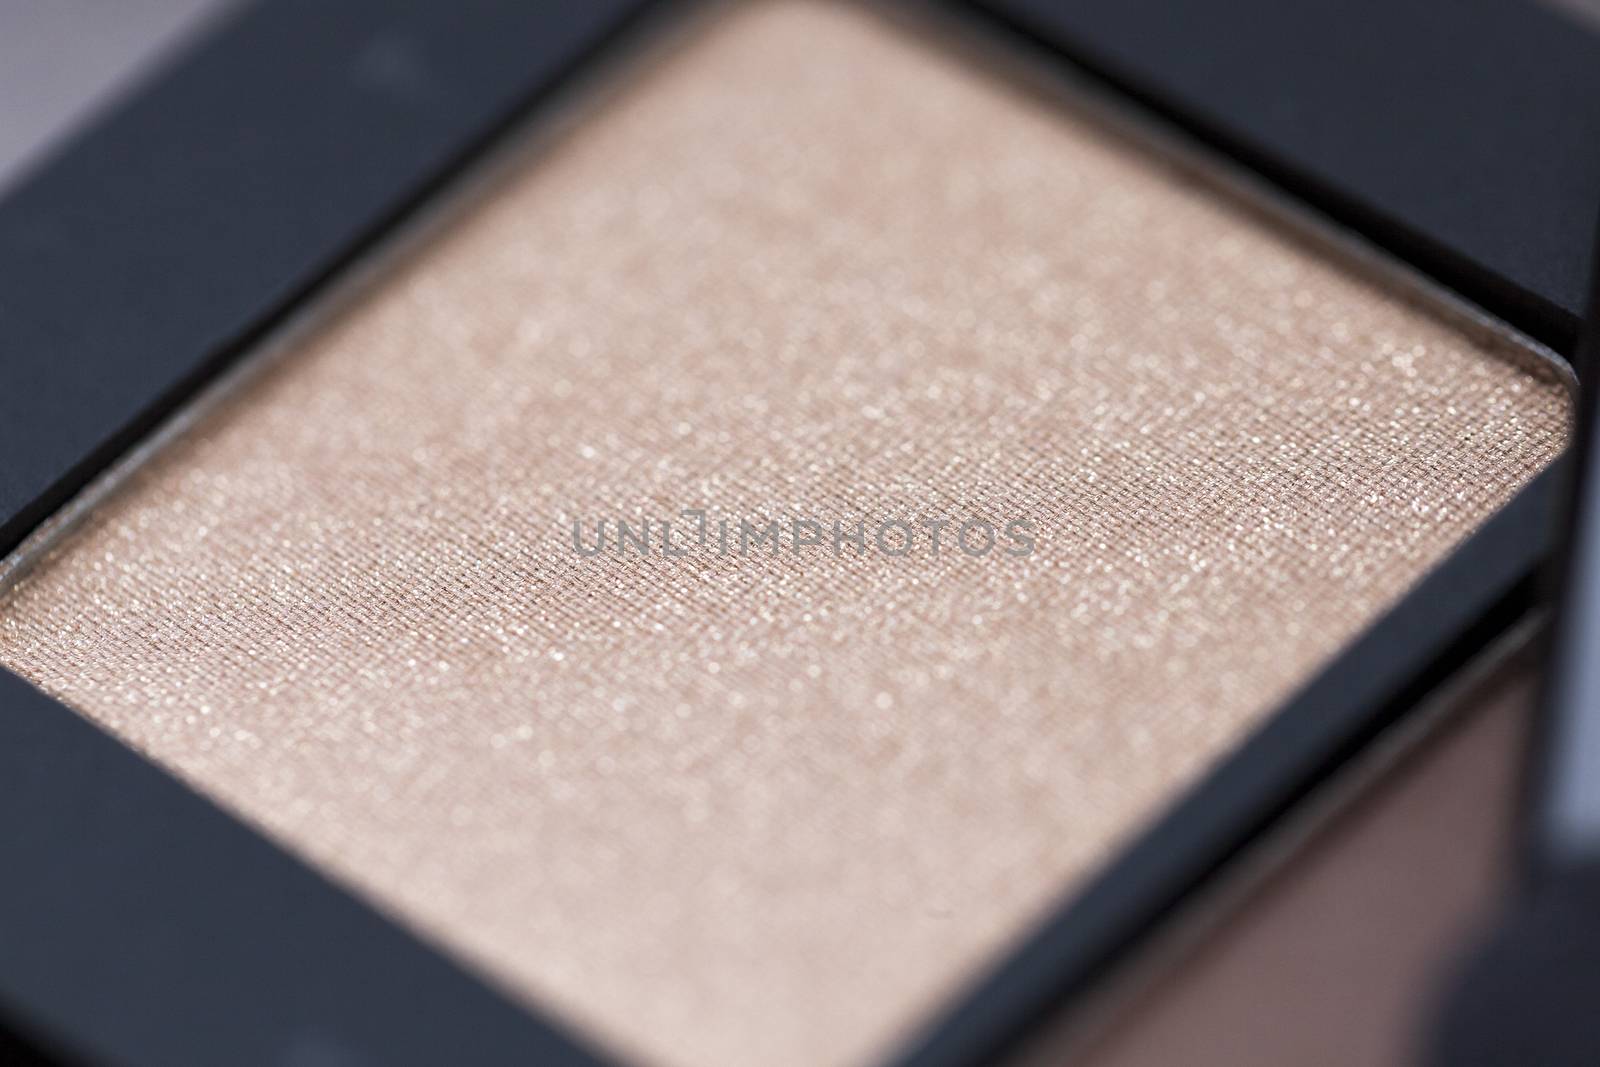   cosmetics for makeup on eyes, eye shadow close-up, small depth of field